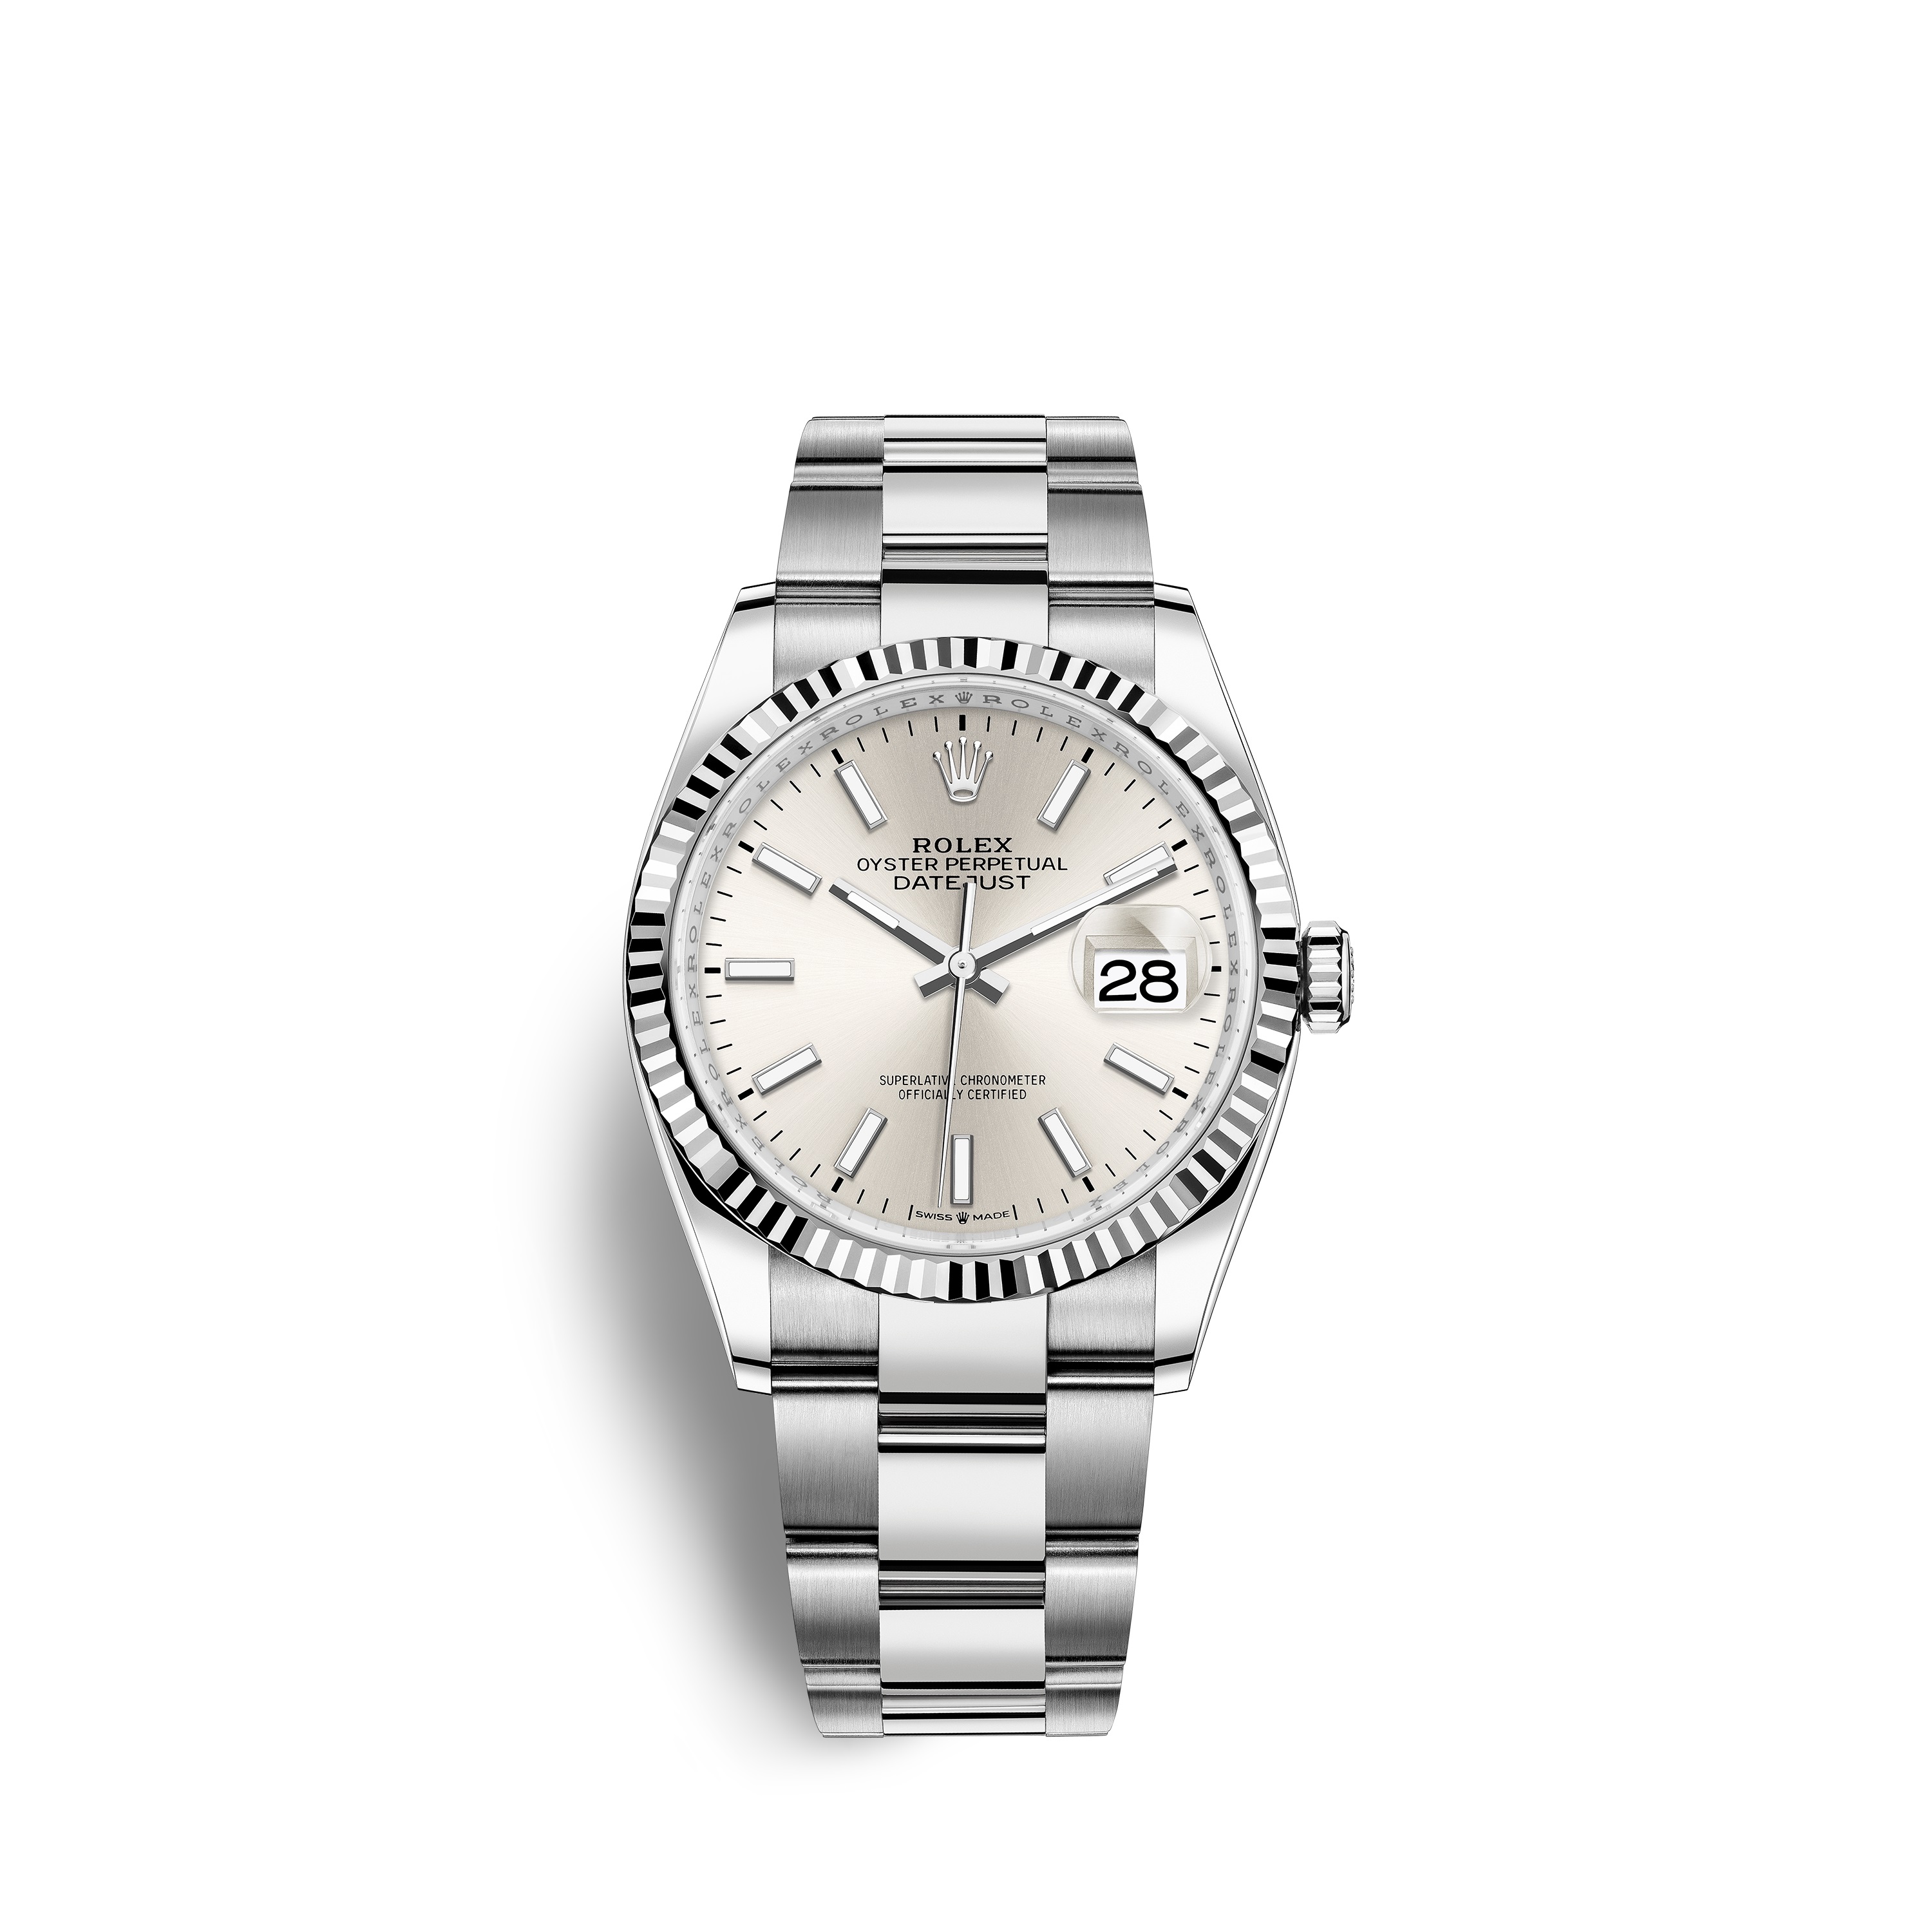 Datejust 36 126234 White Gold & Stainless Steel Watch (Silver)